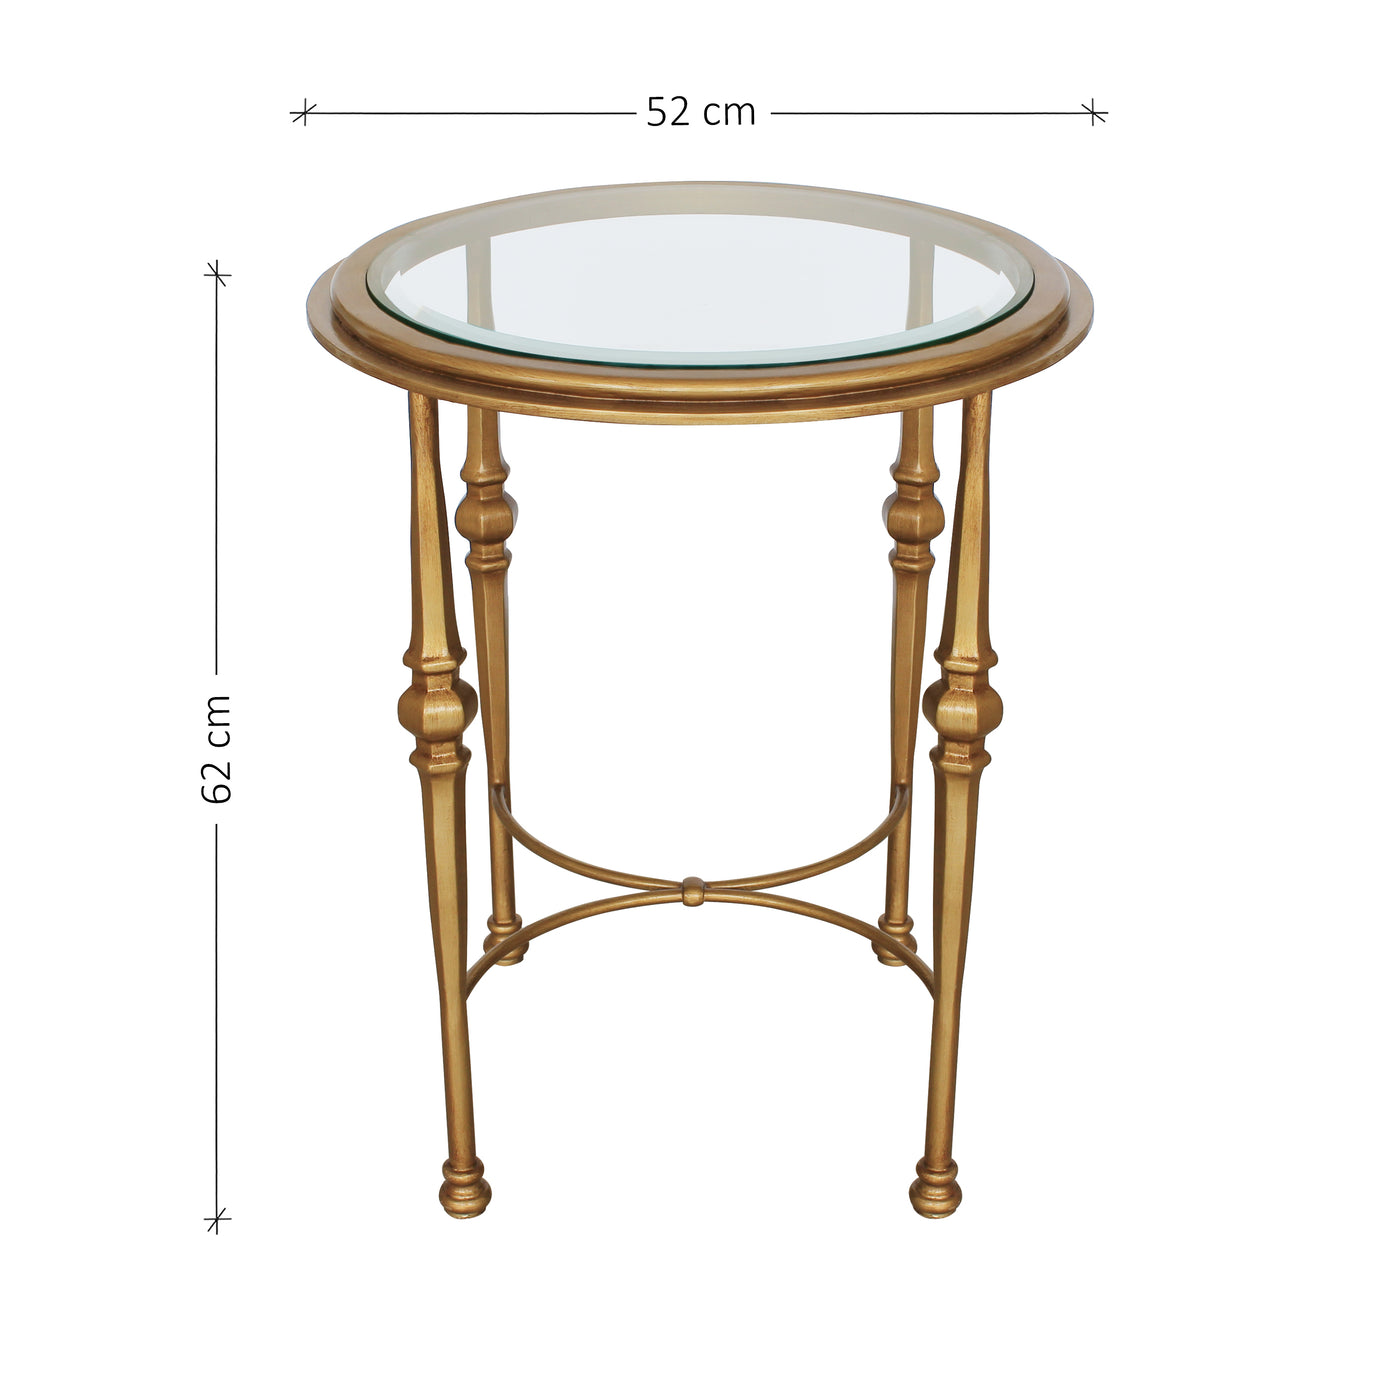 Classical round side table with annotated dimensions